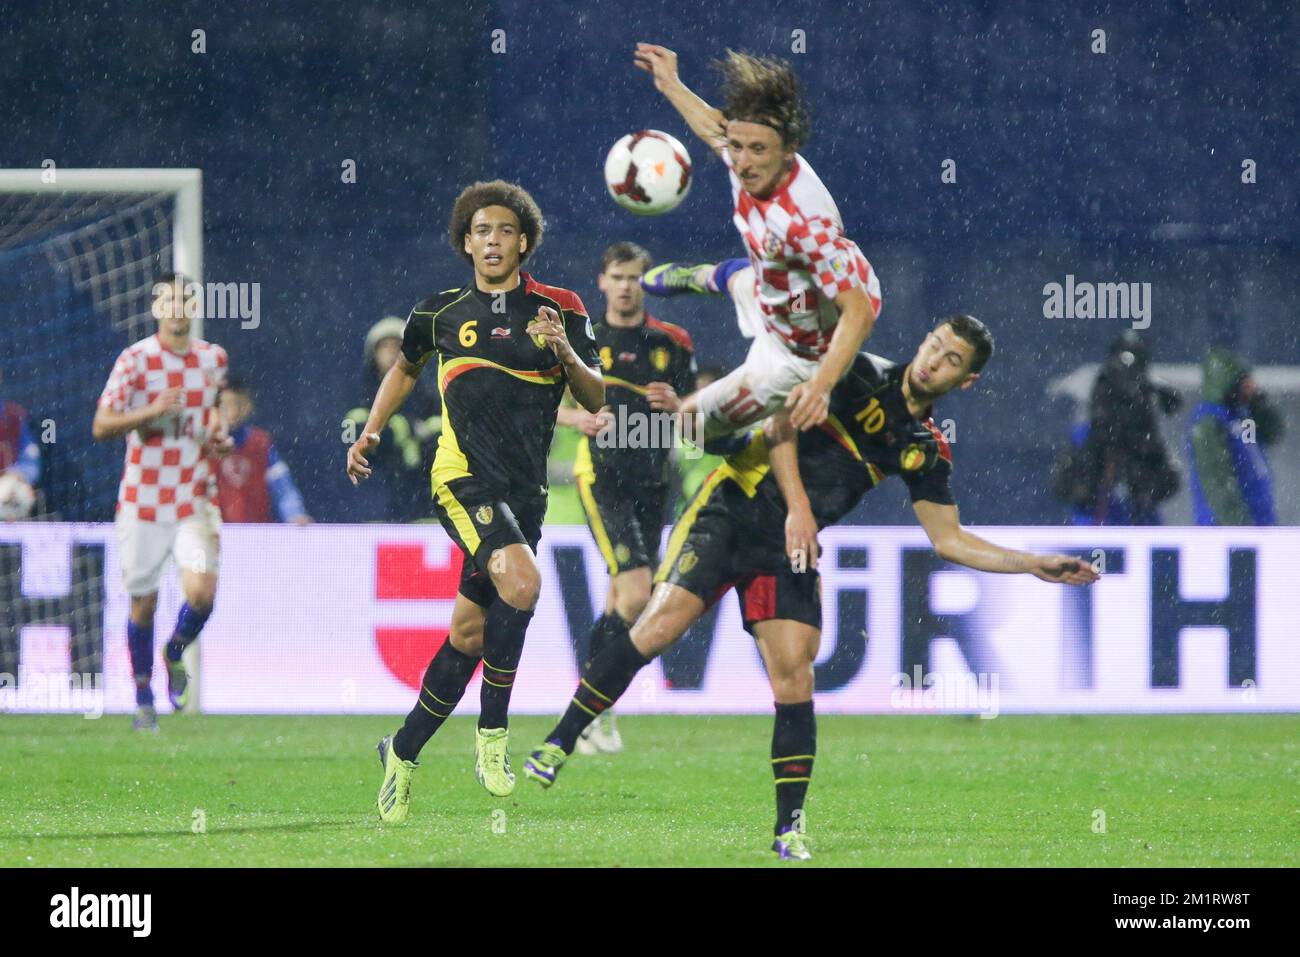 20131011 - ZAGREB, CROATIA: Belgium's Axel Witsel, Croatia's Luka Modric and Belgium's Eden Hazard fight for the ball during a soccer game between Belgian national team The Red Devils and the Croatian national team in the Maksimir stadium in Zagreb, Croatia, Friday 11 October 2013, a qualification game for the 2014 FIFA World Cup. The Red Devils won the match and qualified for the 2014 FIFA World Cup in Brazil. BELGA PHOTO PRIMOZ LAVRE Stock Photo